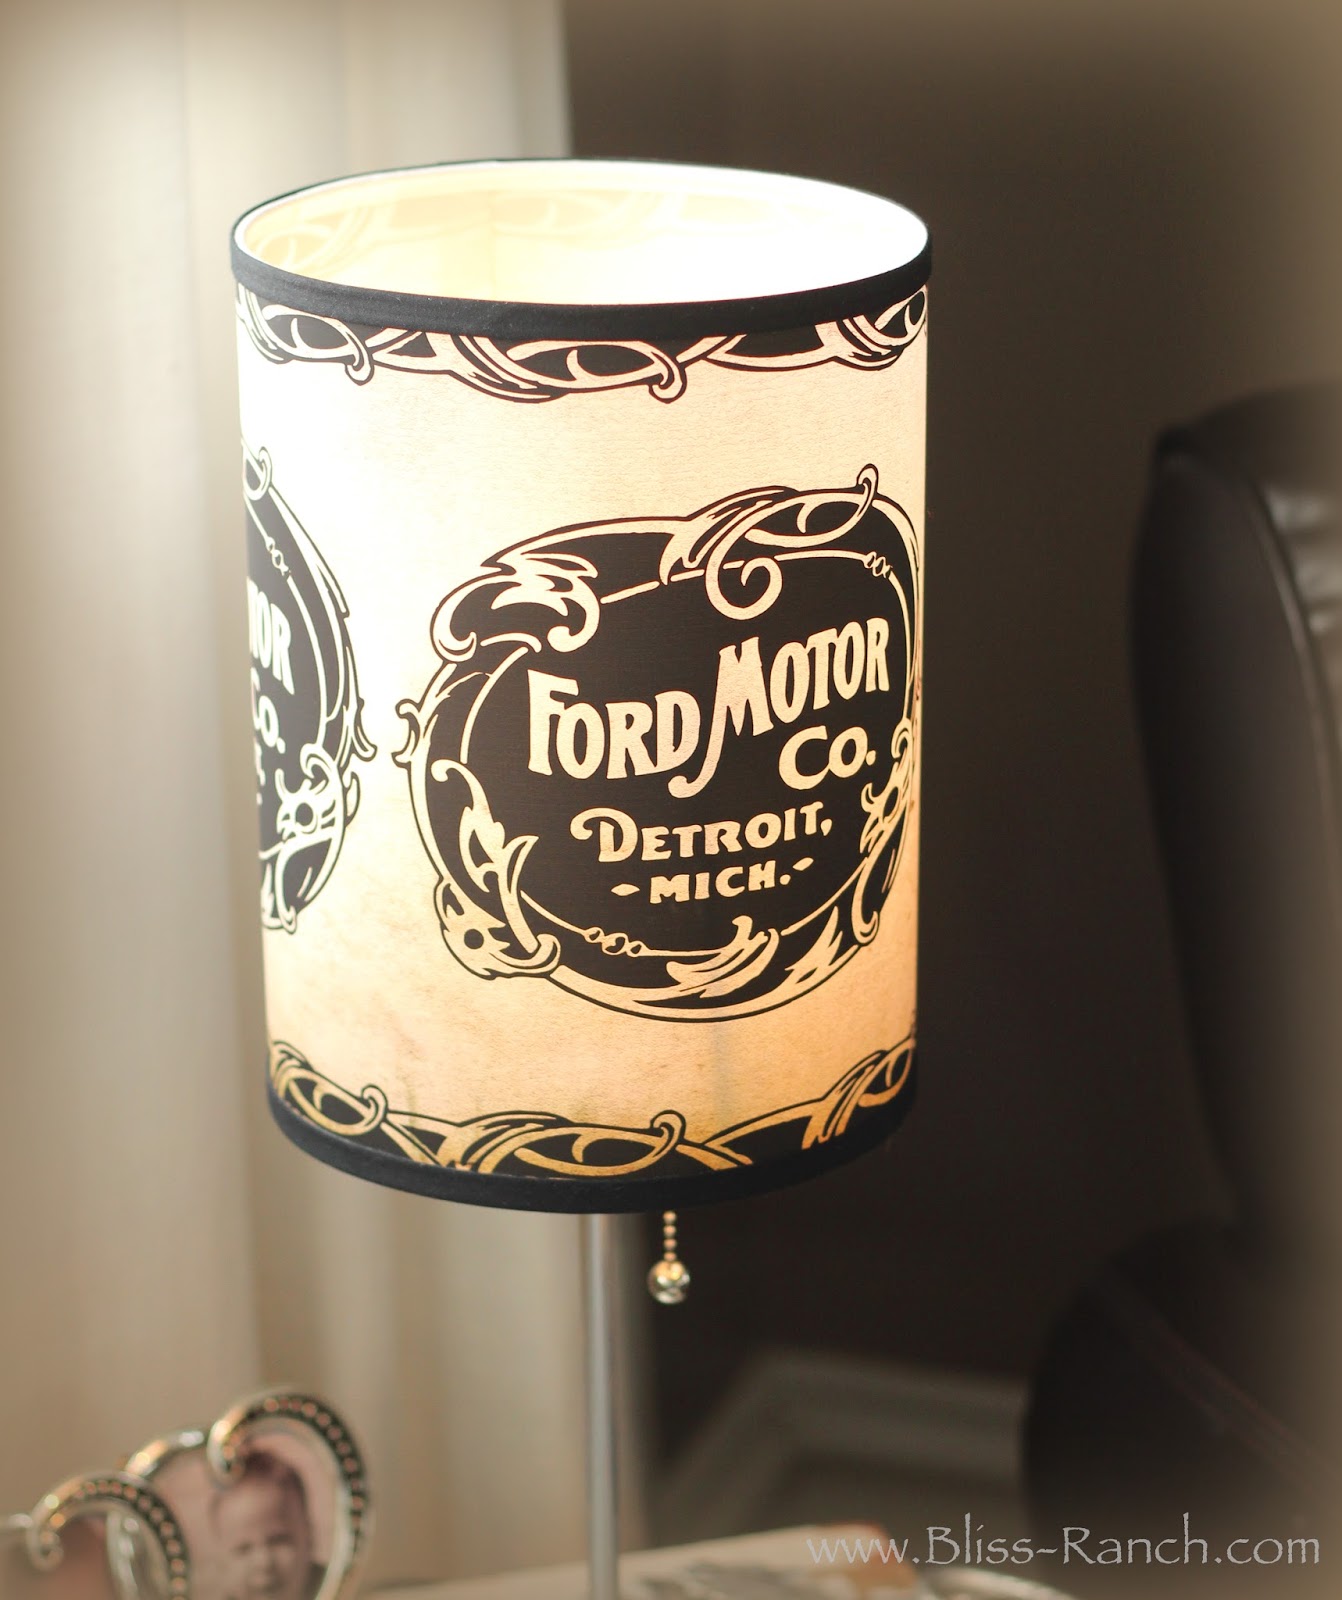 Ford Lamp in a box, Bliss-Ranch.com